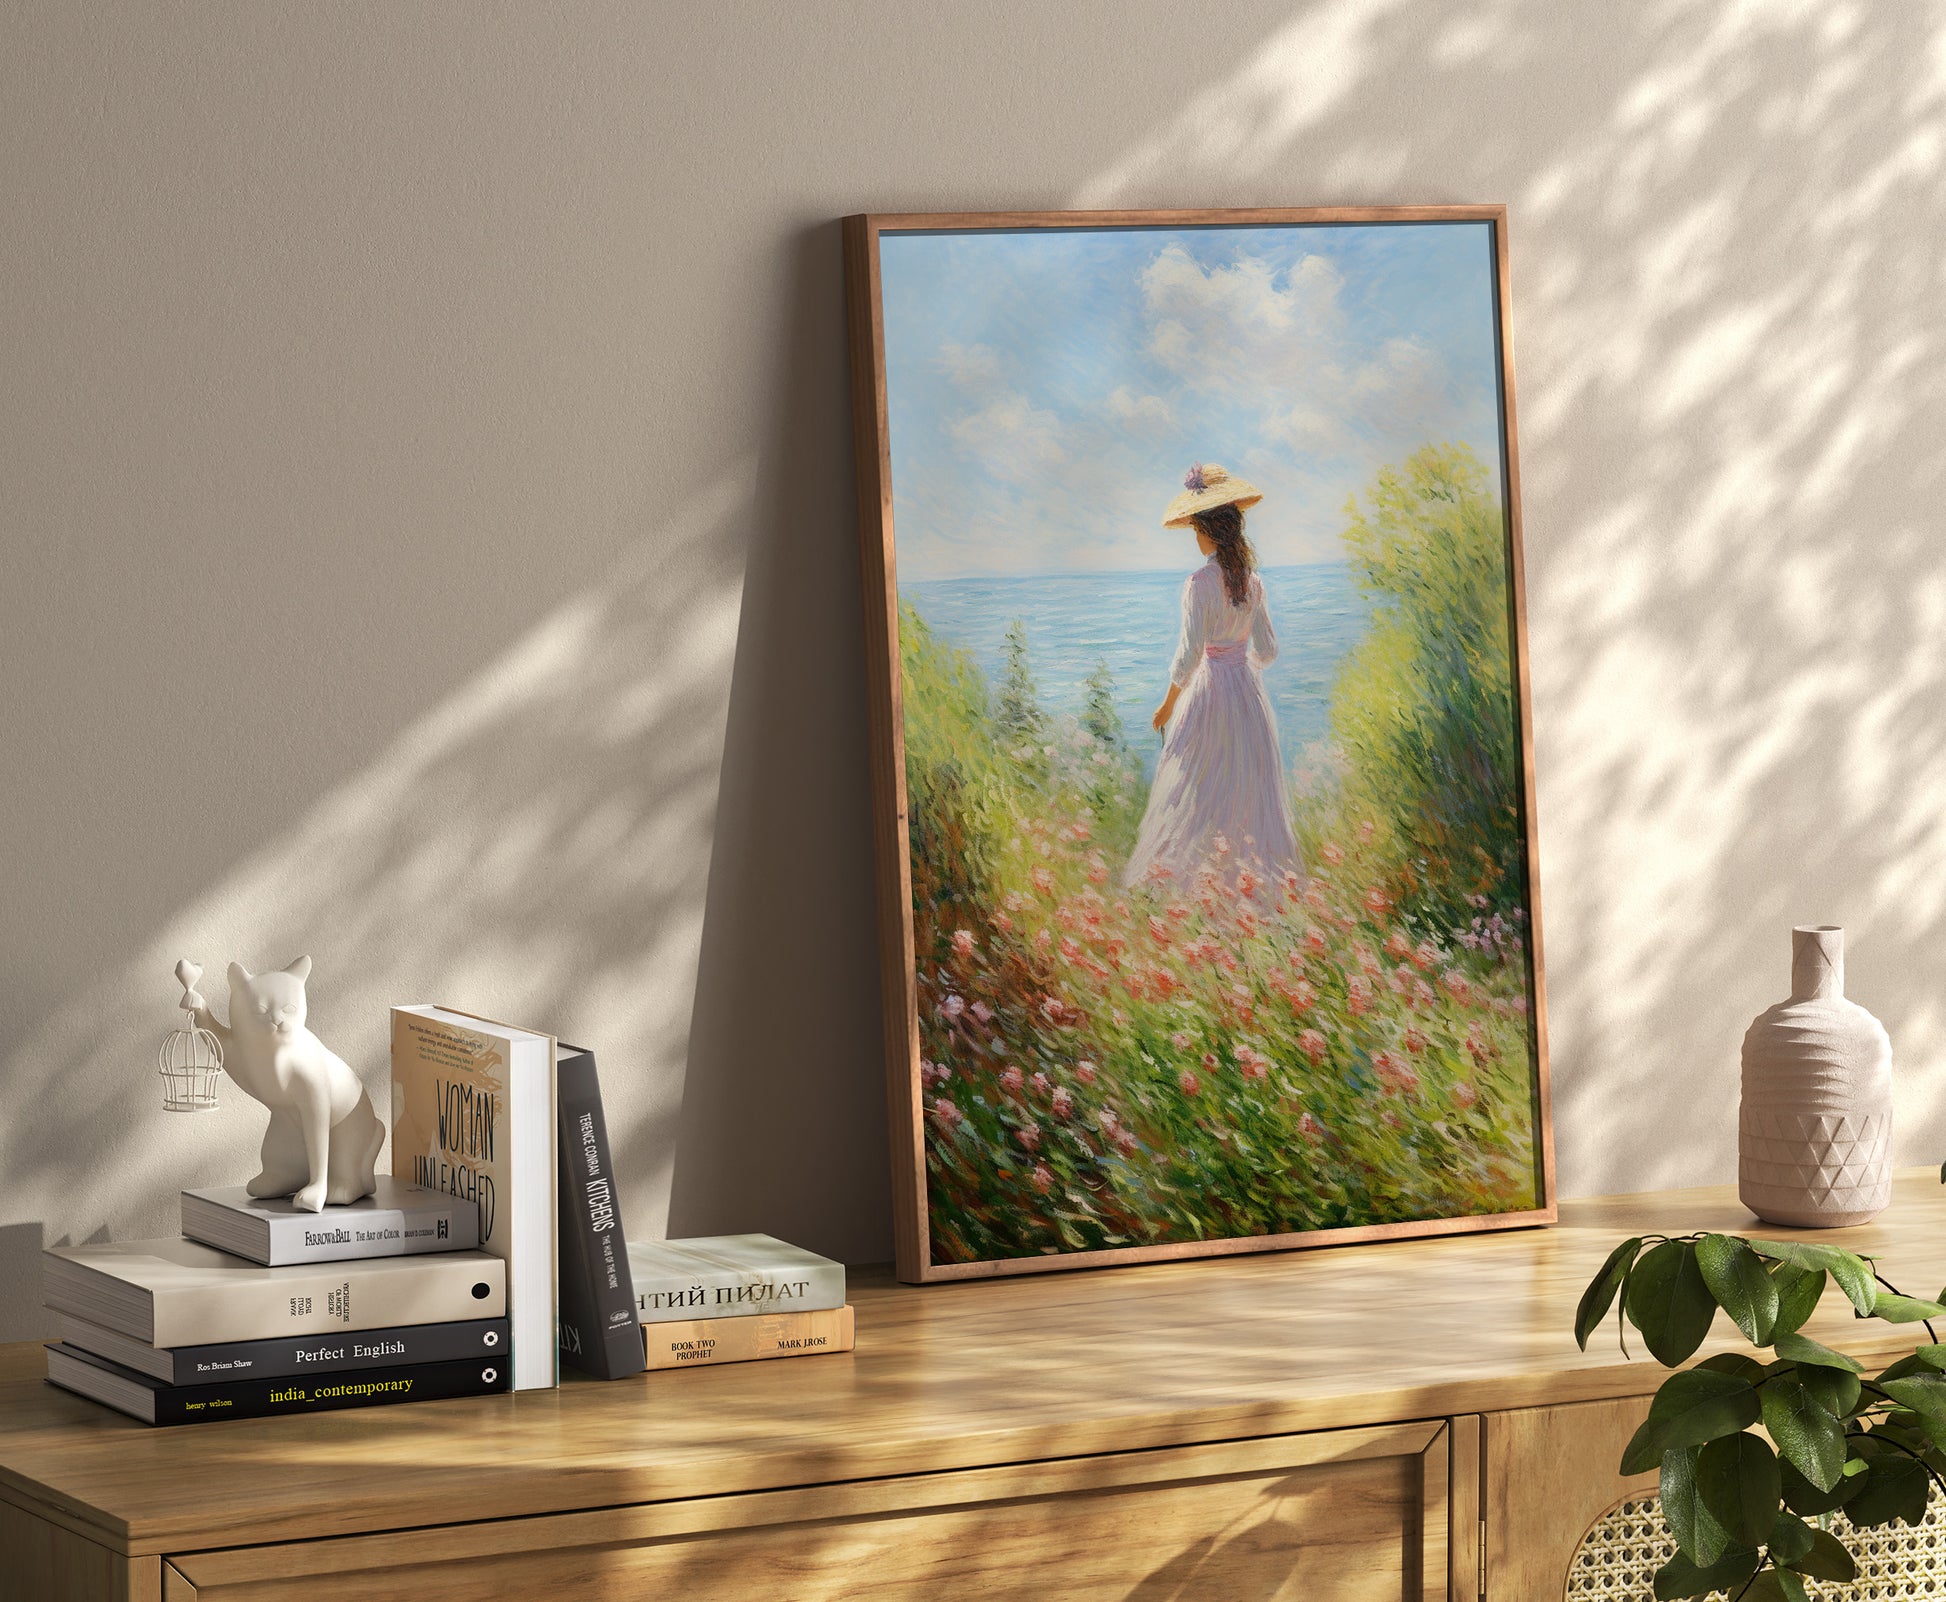 Painting of a woman in a field by the sea, on a console with decor and books.